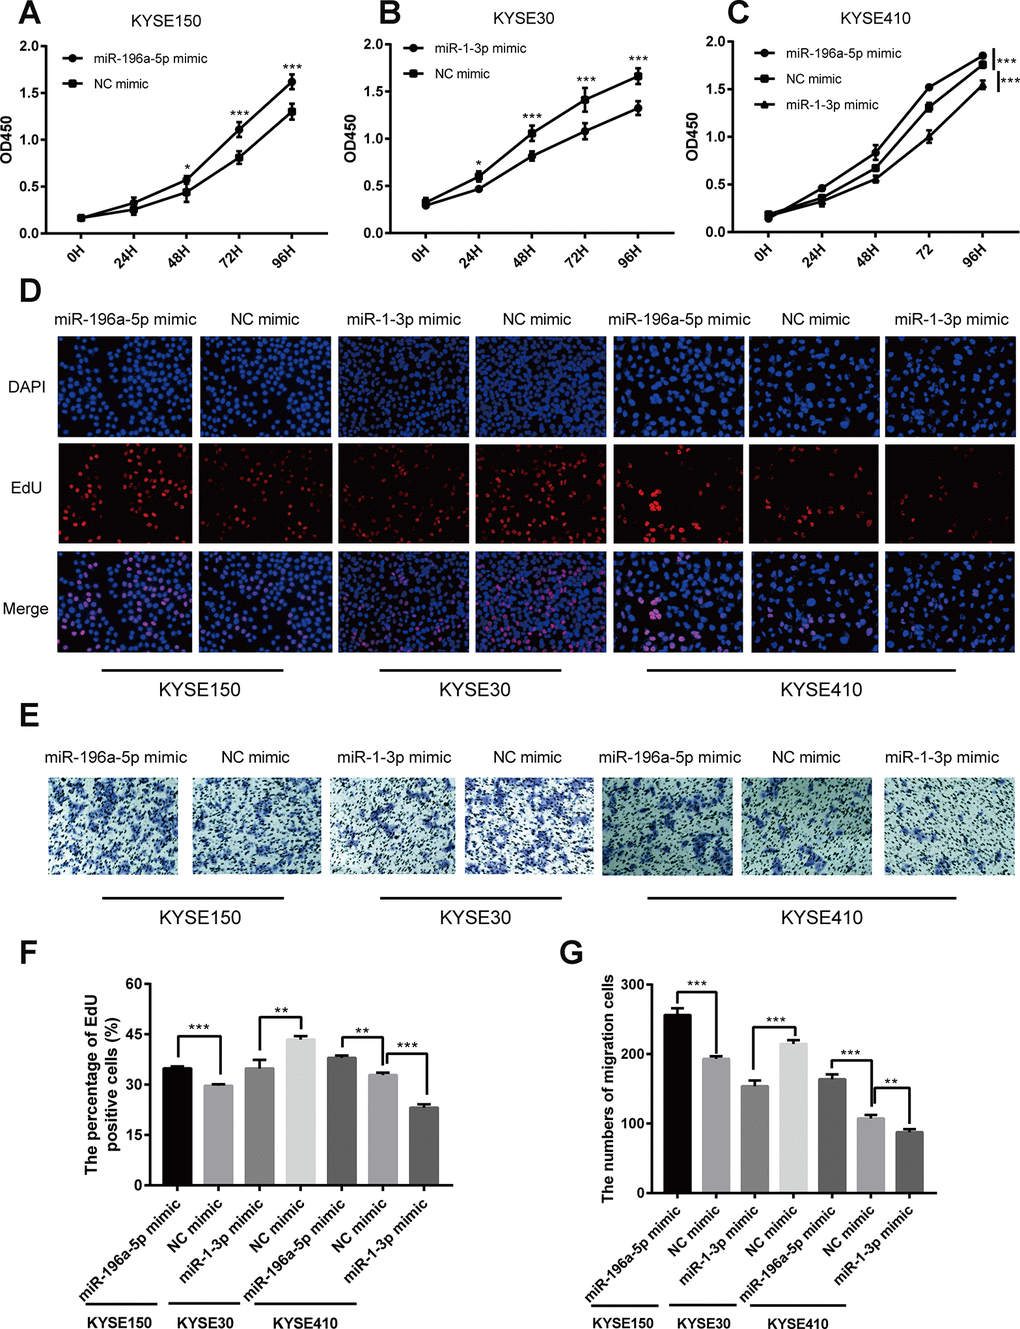 Opposing effects of miR-196a-5p and miR-1-3p on proliferation and migration in cultured ESCC cells. (A–C) CCK-8 cell proliferation assay results from KYSE150, KYSE30, and KYSE410 cells transfected with mimics of miR-196a-5p, miR-1-3p, or negative control (NC). (D, F) EdU cell proliferation assay results from KYSE150, KYSE30, and KYSE410 cells transfected with mimics of miR-196a-5p, miR-1-3p, or NC. (E, G) Transwell migration assay results from KYSE150, KYSE30, and KYSE410 cells transfected with miRNA mimics. *P P P 